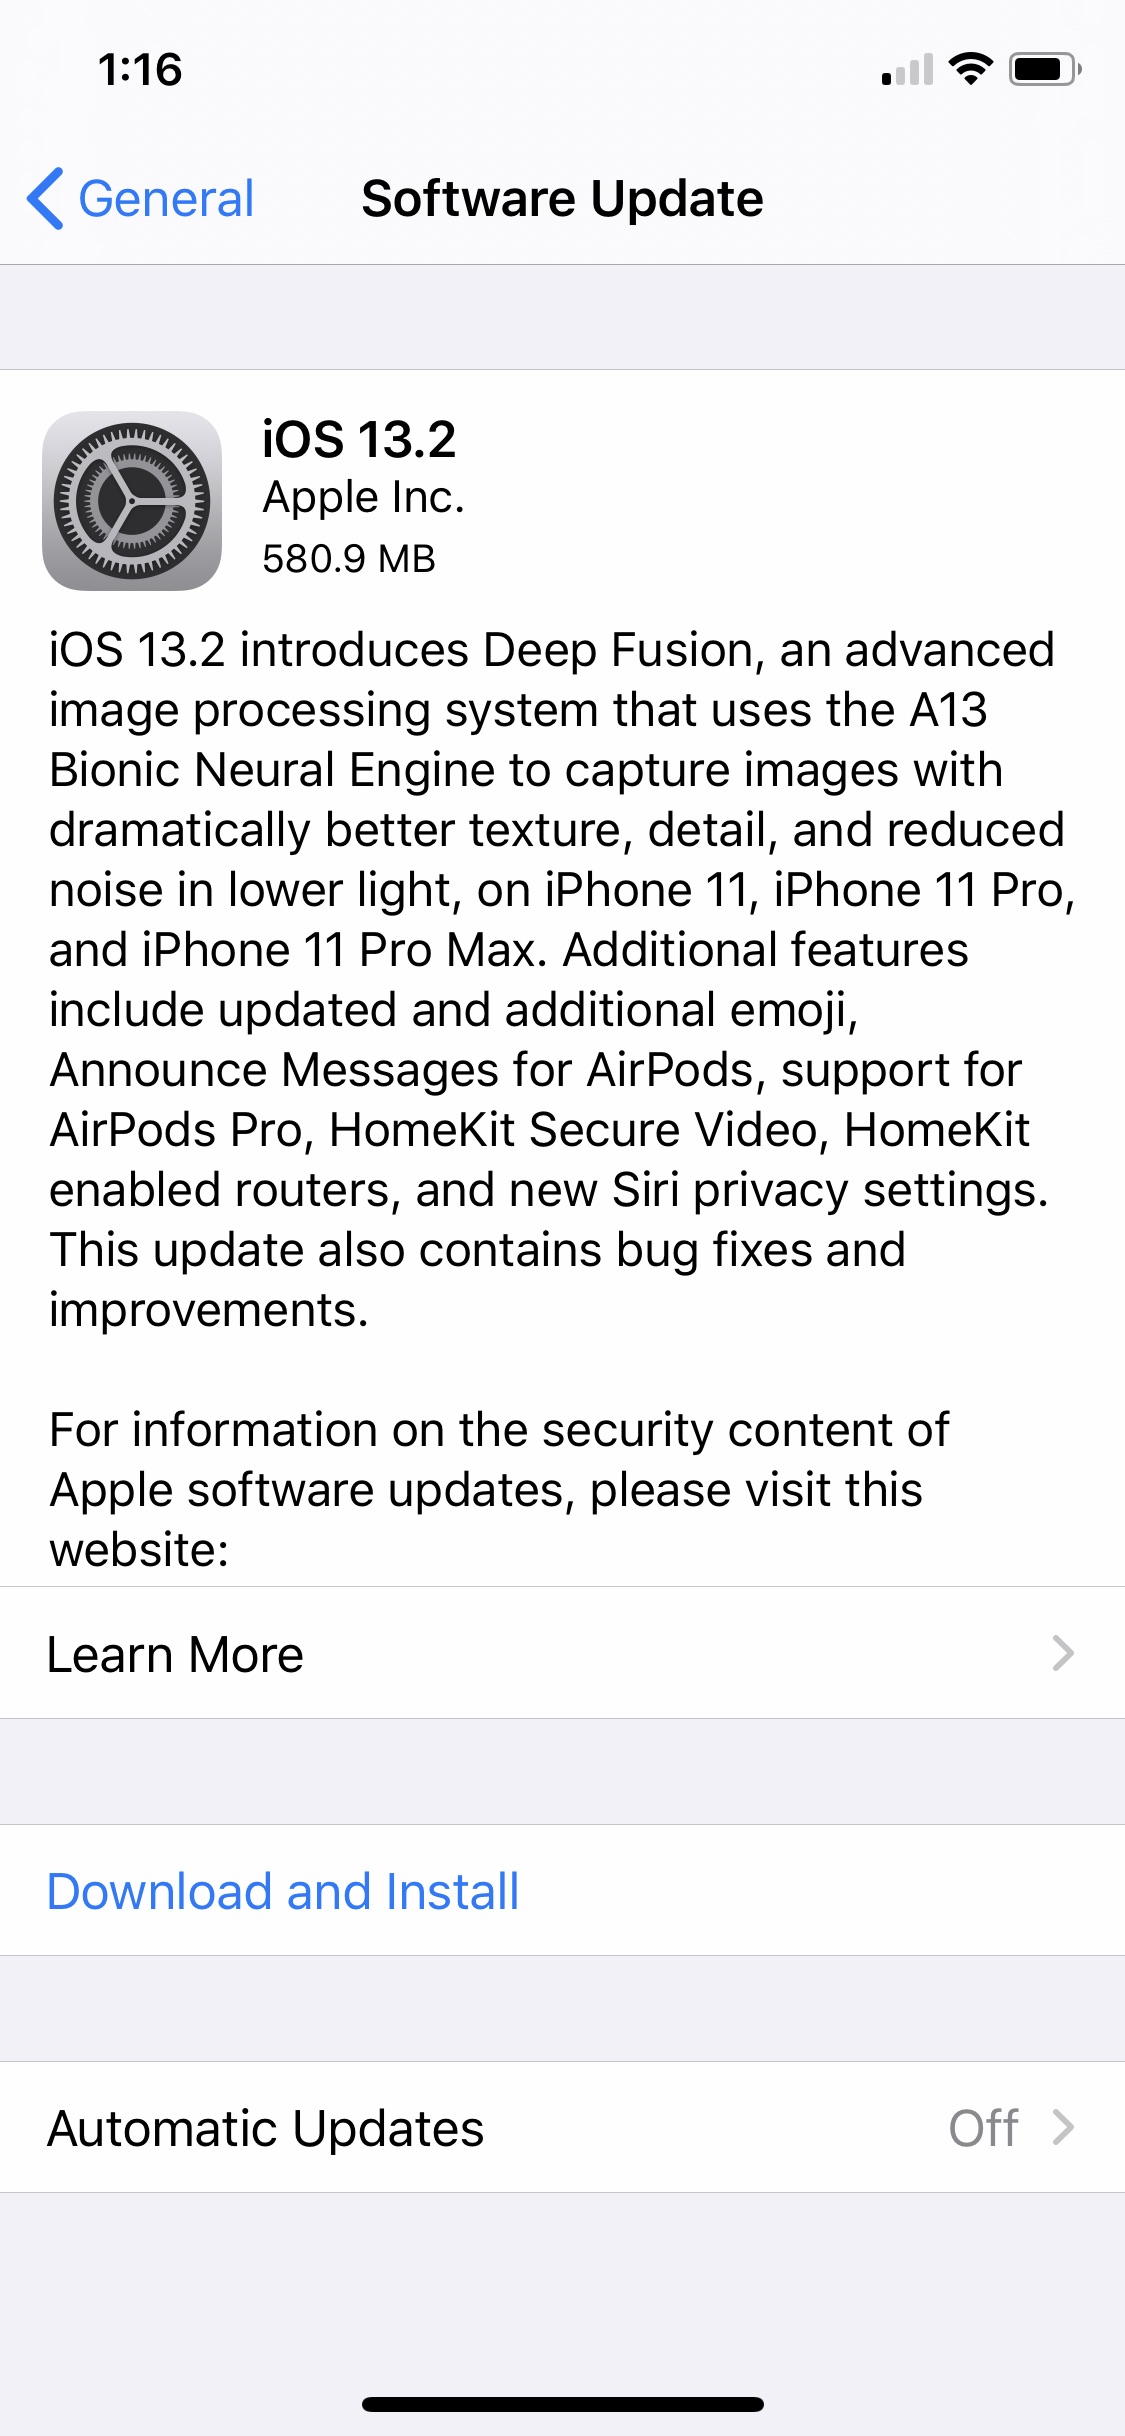 Here is the Full Changelog for iOS 13.2